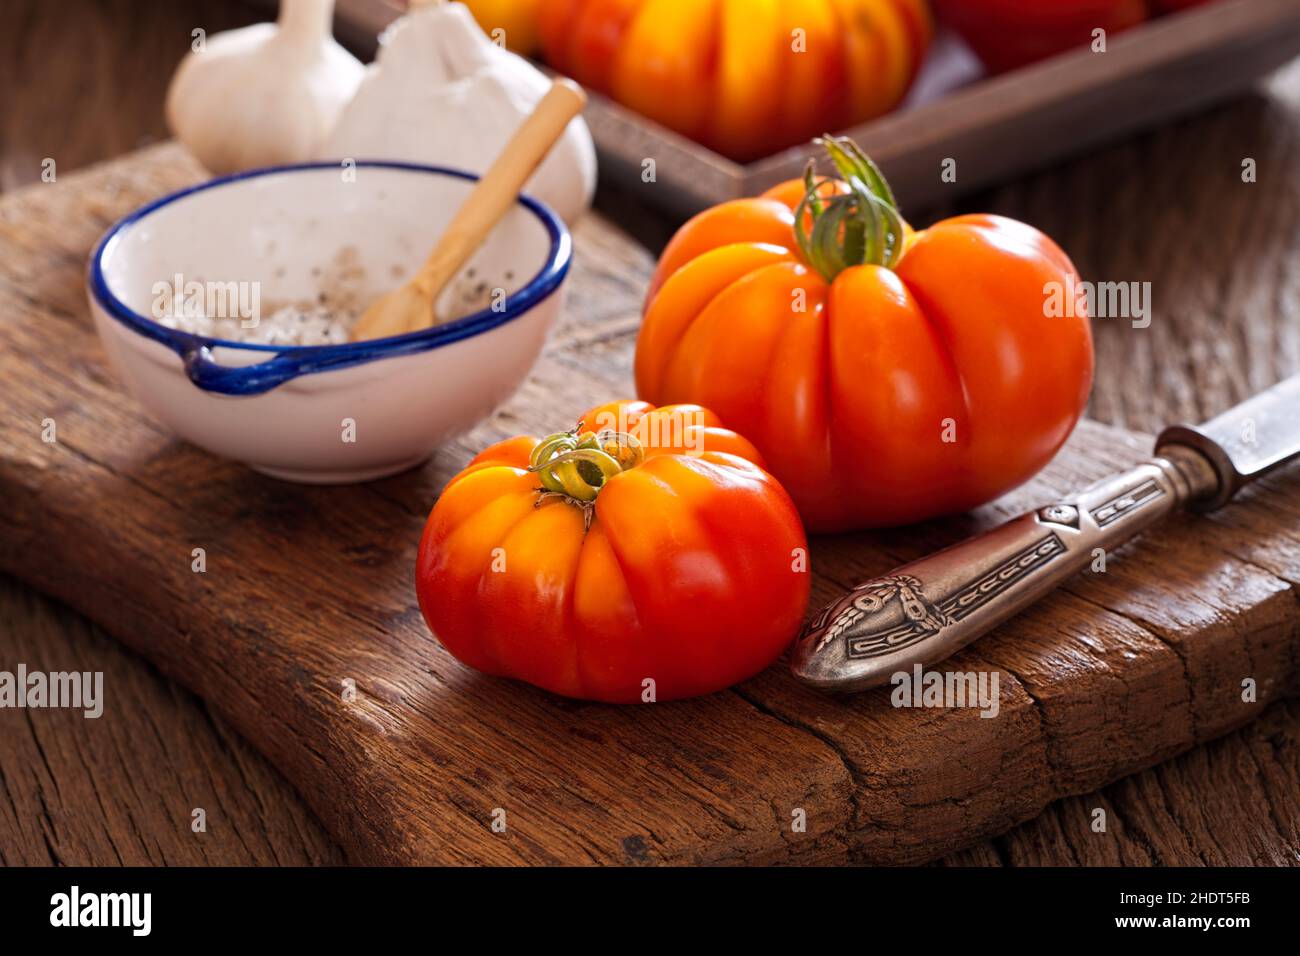 tomate, viande tomate, style campagnard, tomates,tomatos, styles de pays Banque D'Images